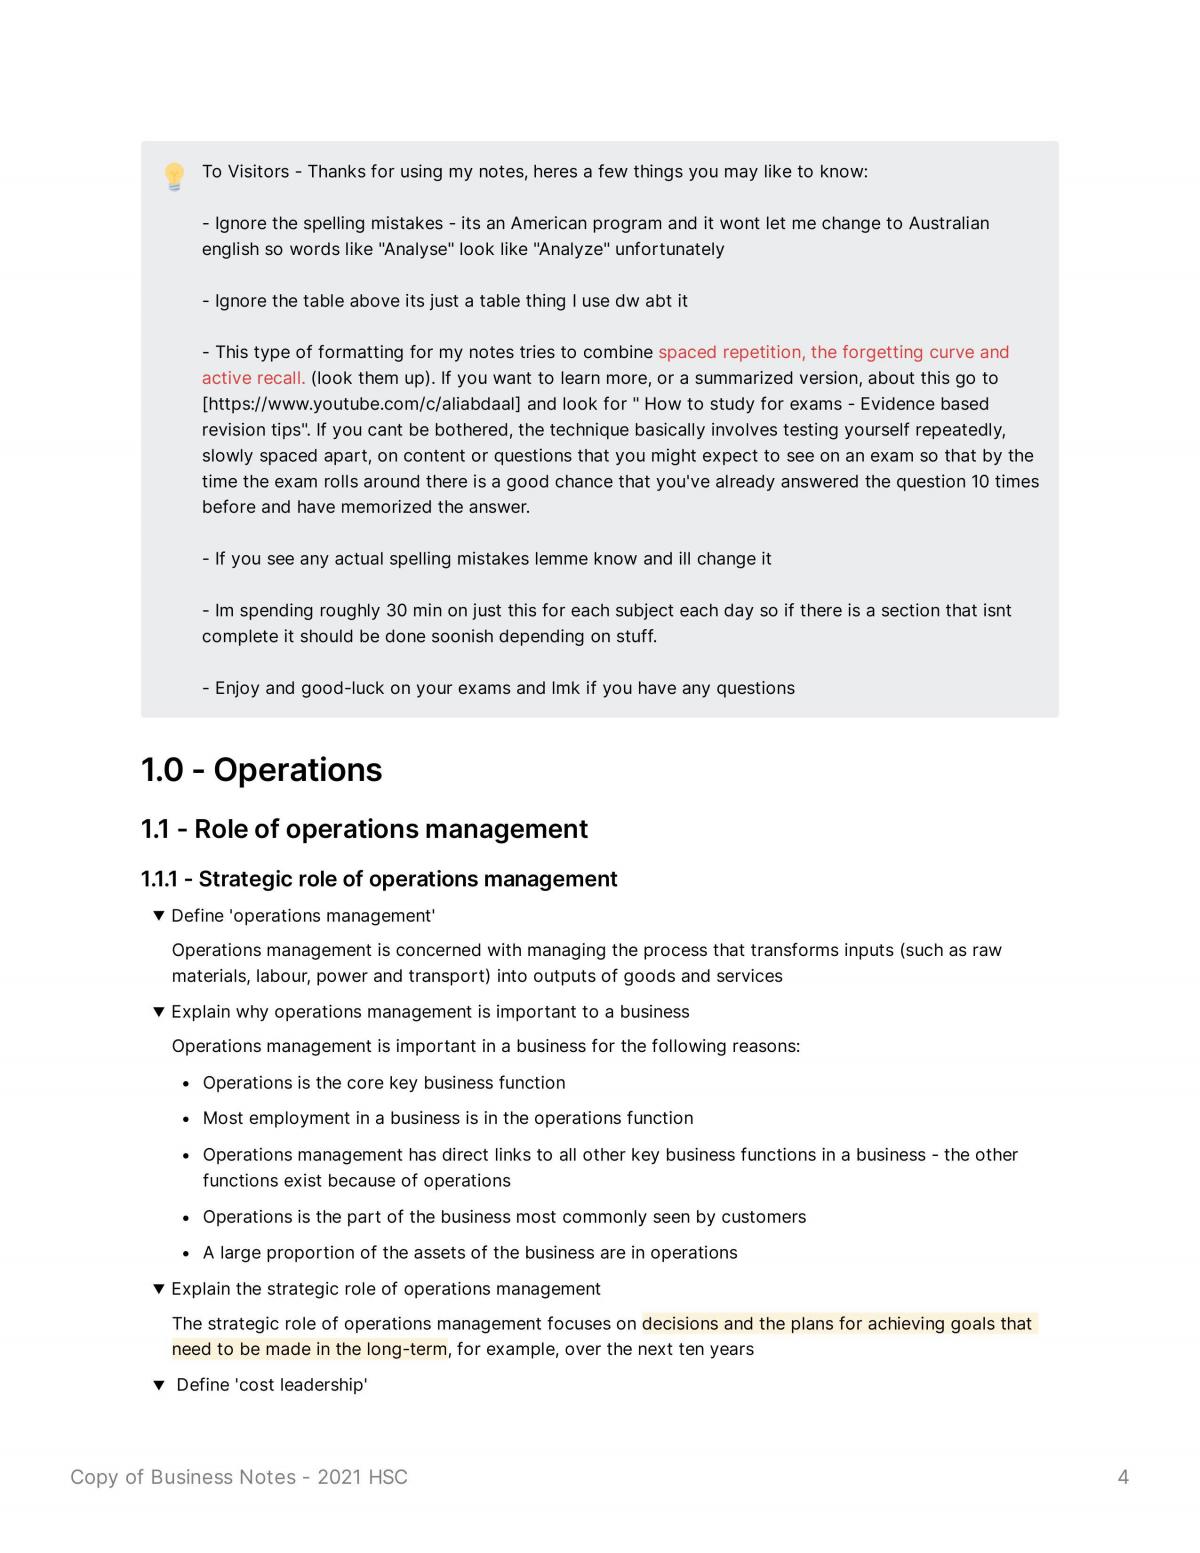 Business Notes - 2021 HSC - Page 4